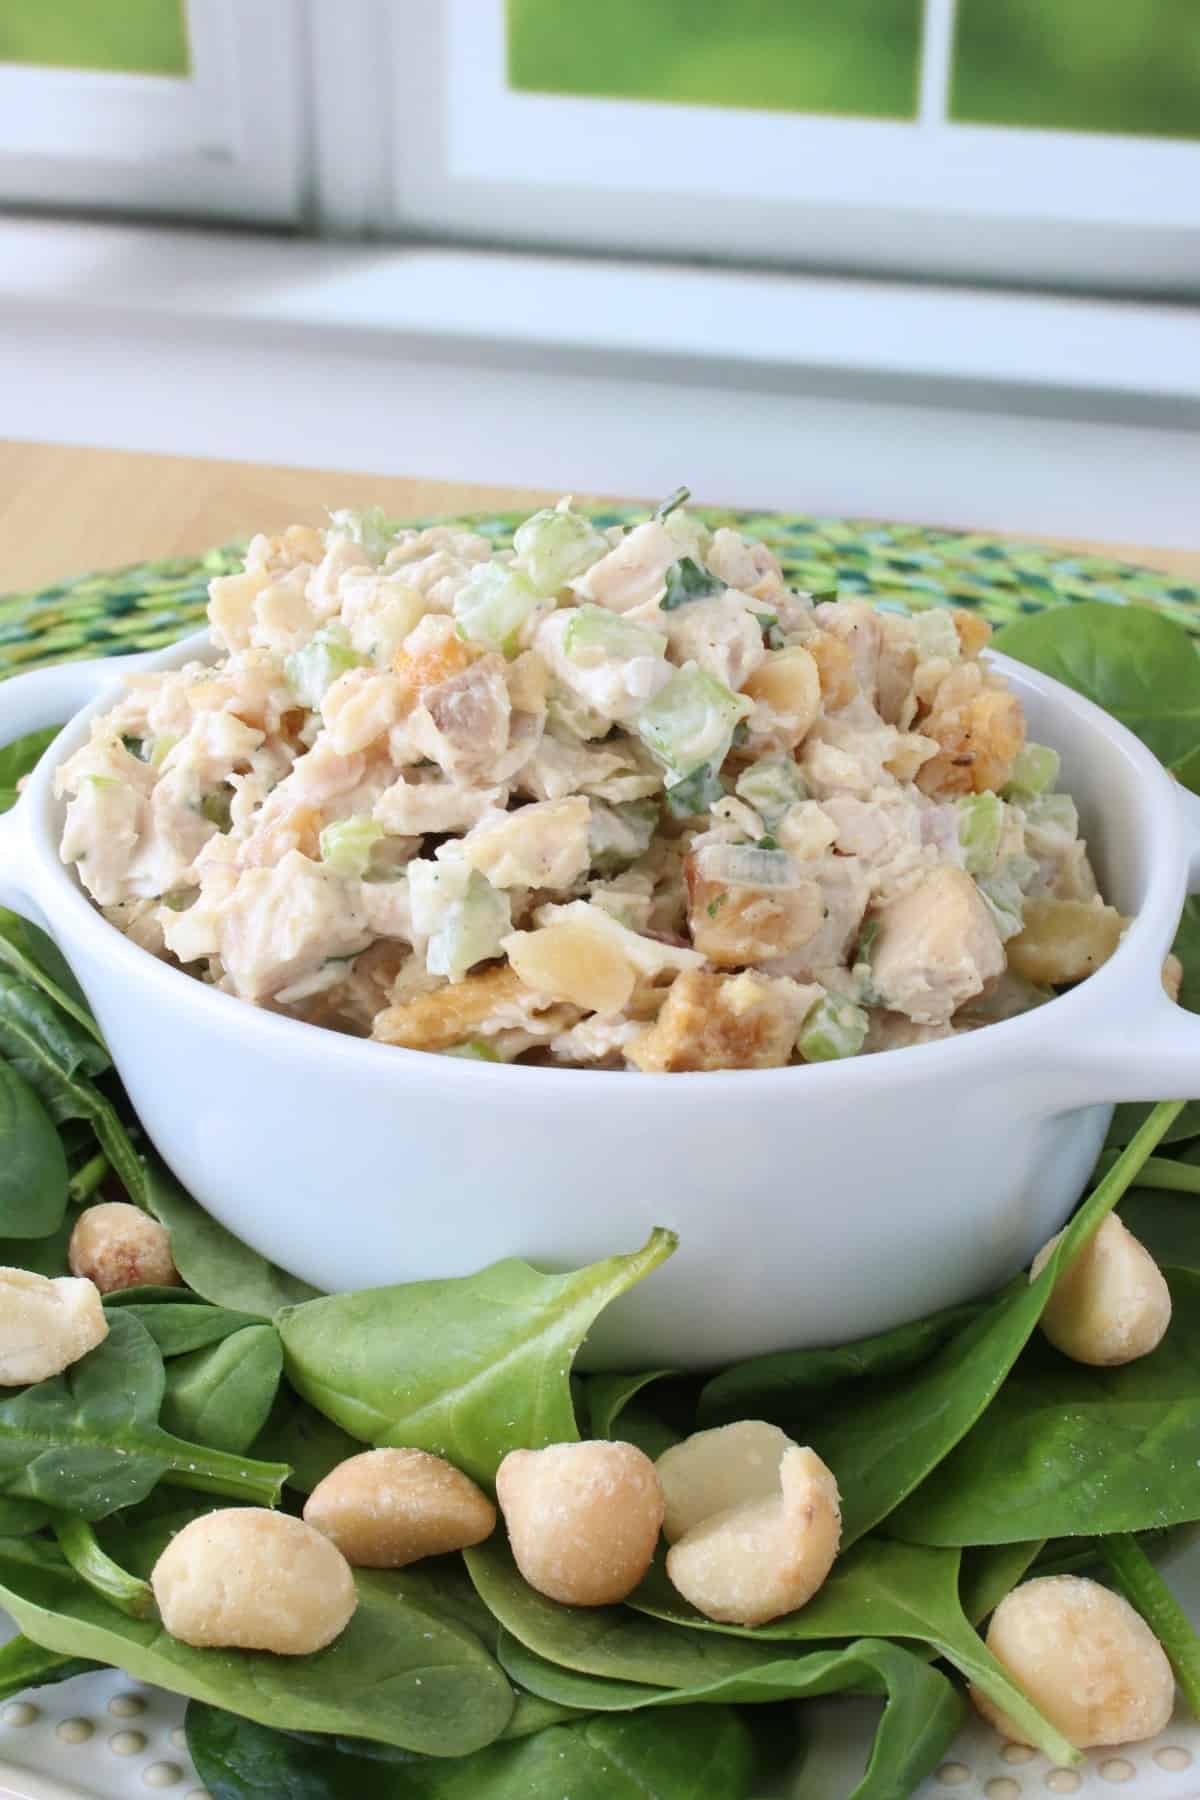 Fresh spinach leaves and macadamia nuts on a plate along with chicken salad with pineapple and macadamia nuts.